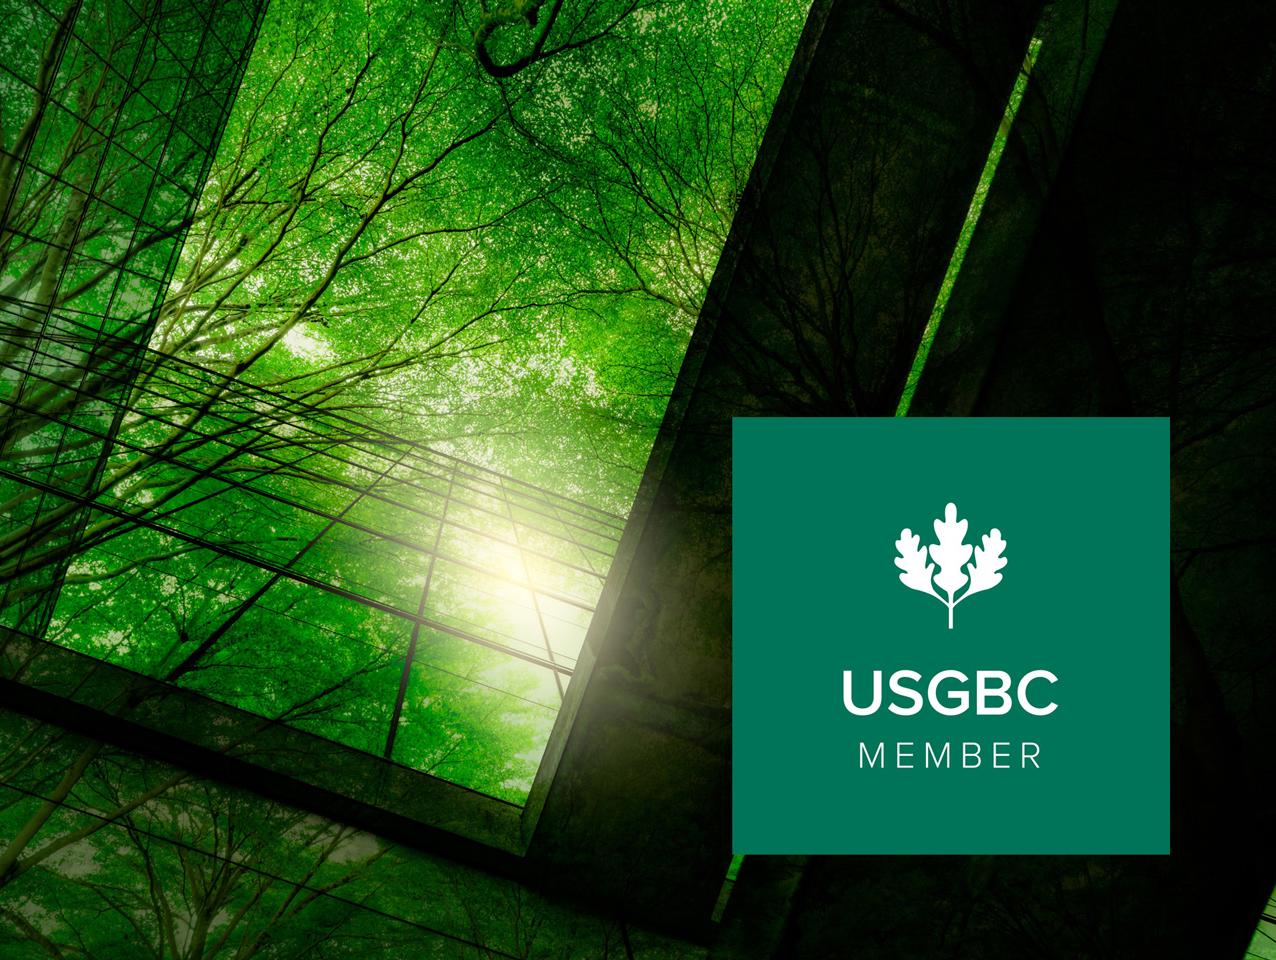 USGBC logo over a view of a green building